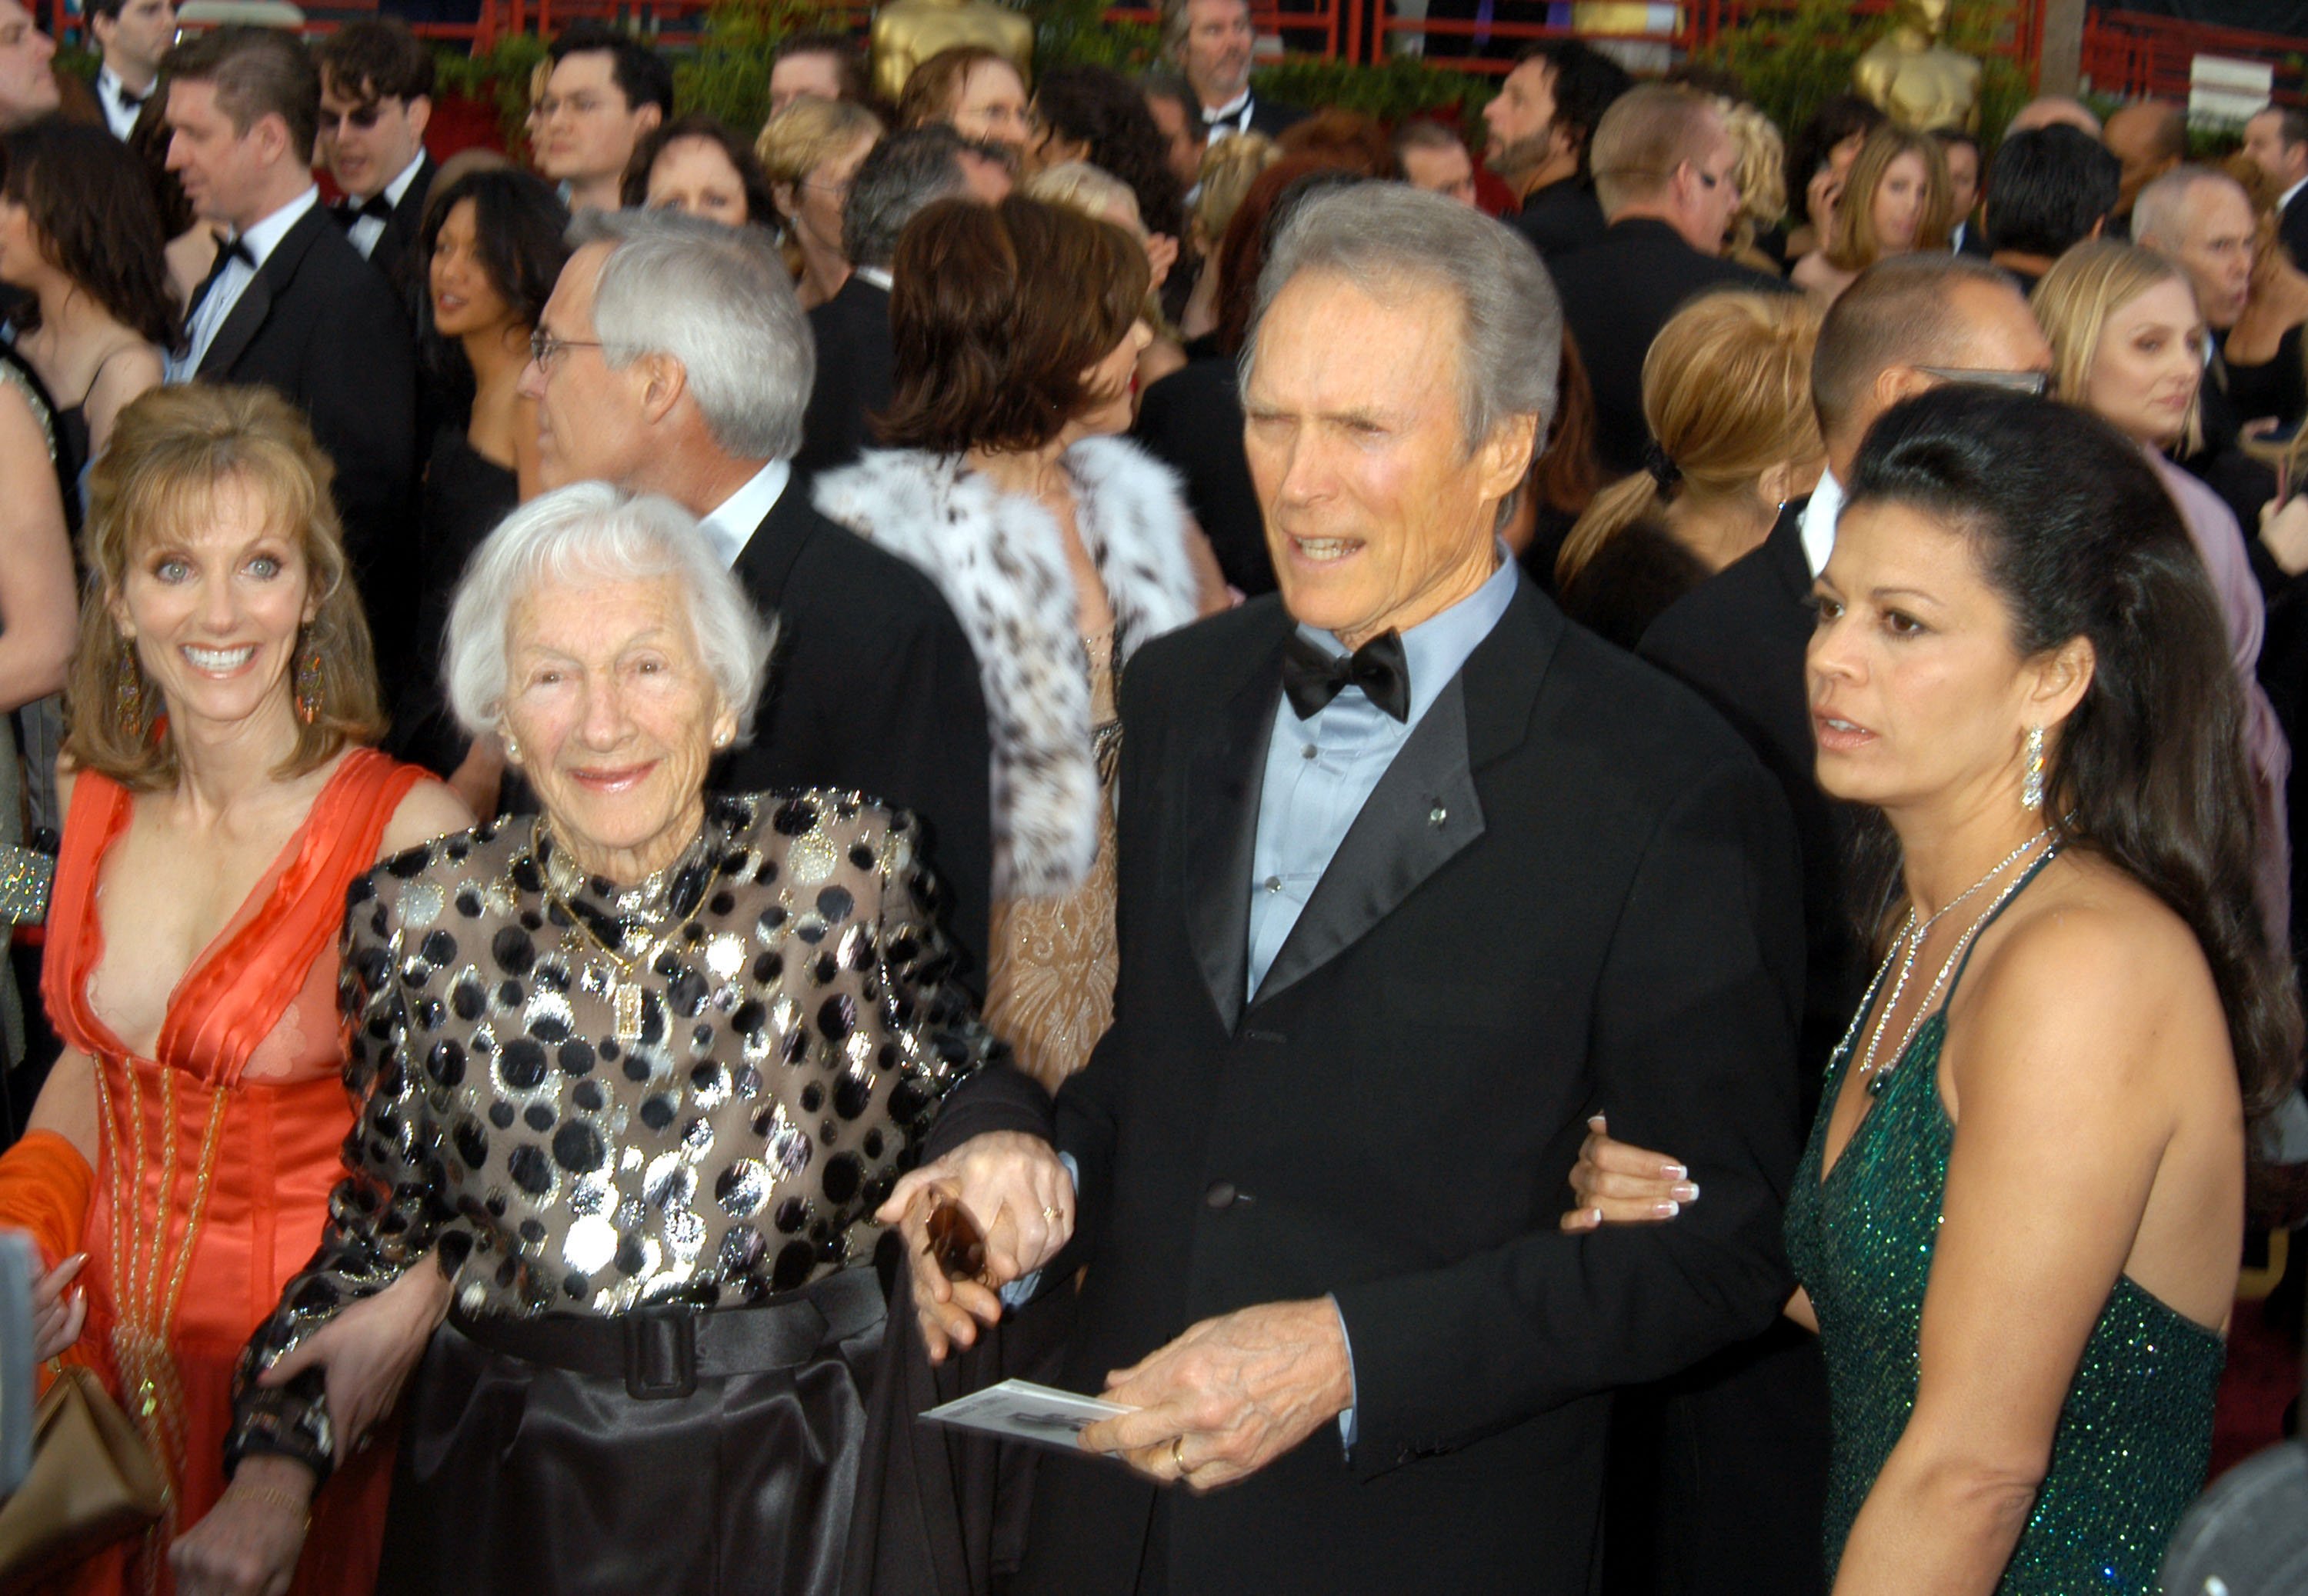 Clint Eastwood with daughter Laurie Murray, mother Ruth Wood and wife Dina Eastwood | Photo: SGranitz/WireImage via Getty Images